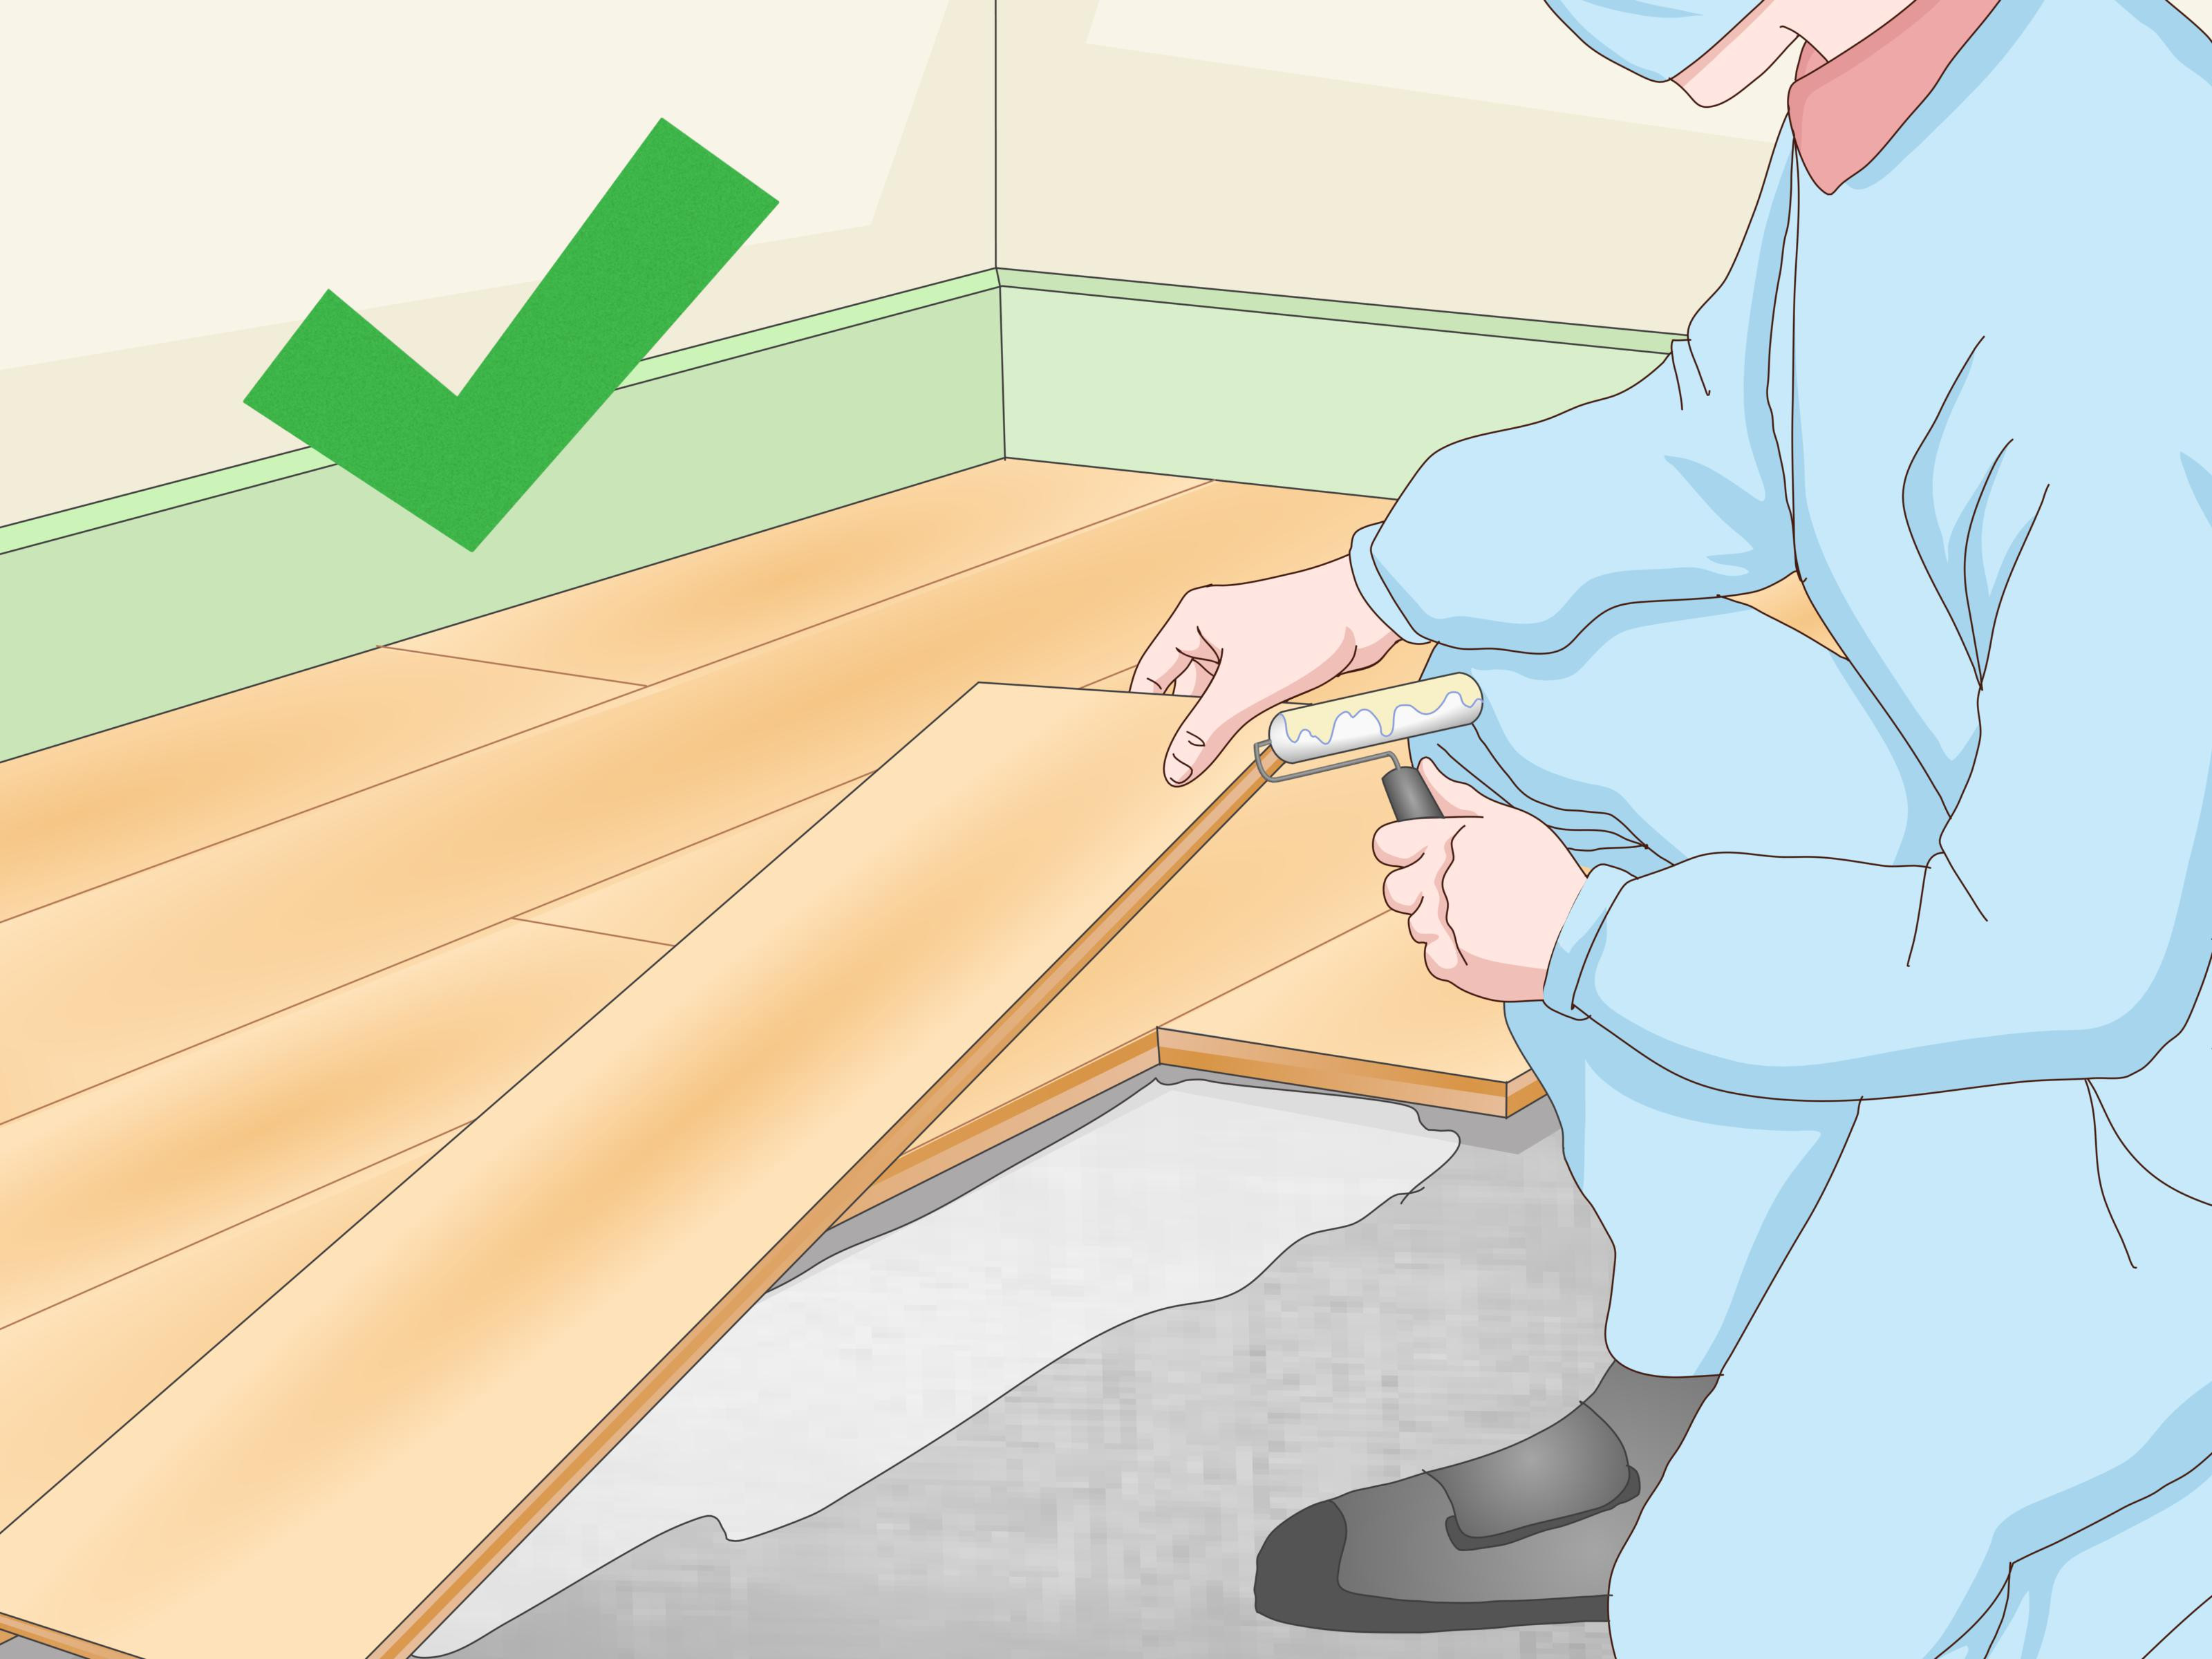 hardwood floor epoxy filler of 3 ways to close gaps in laminate flooring wikihow with close gaps in laminate flooring step 13